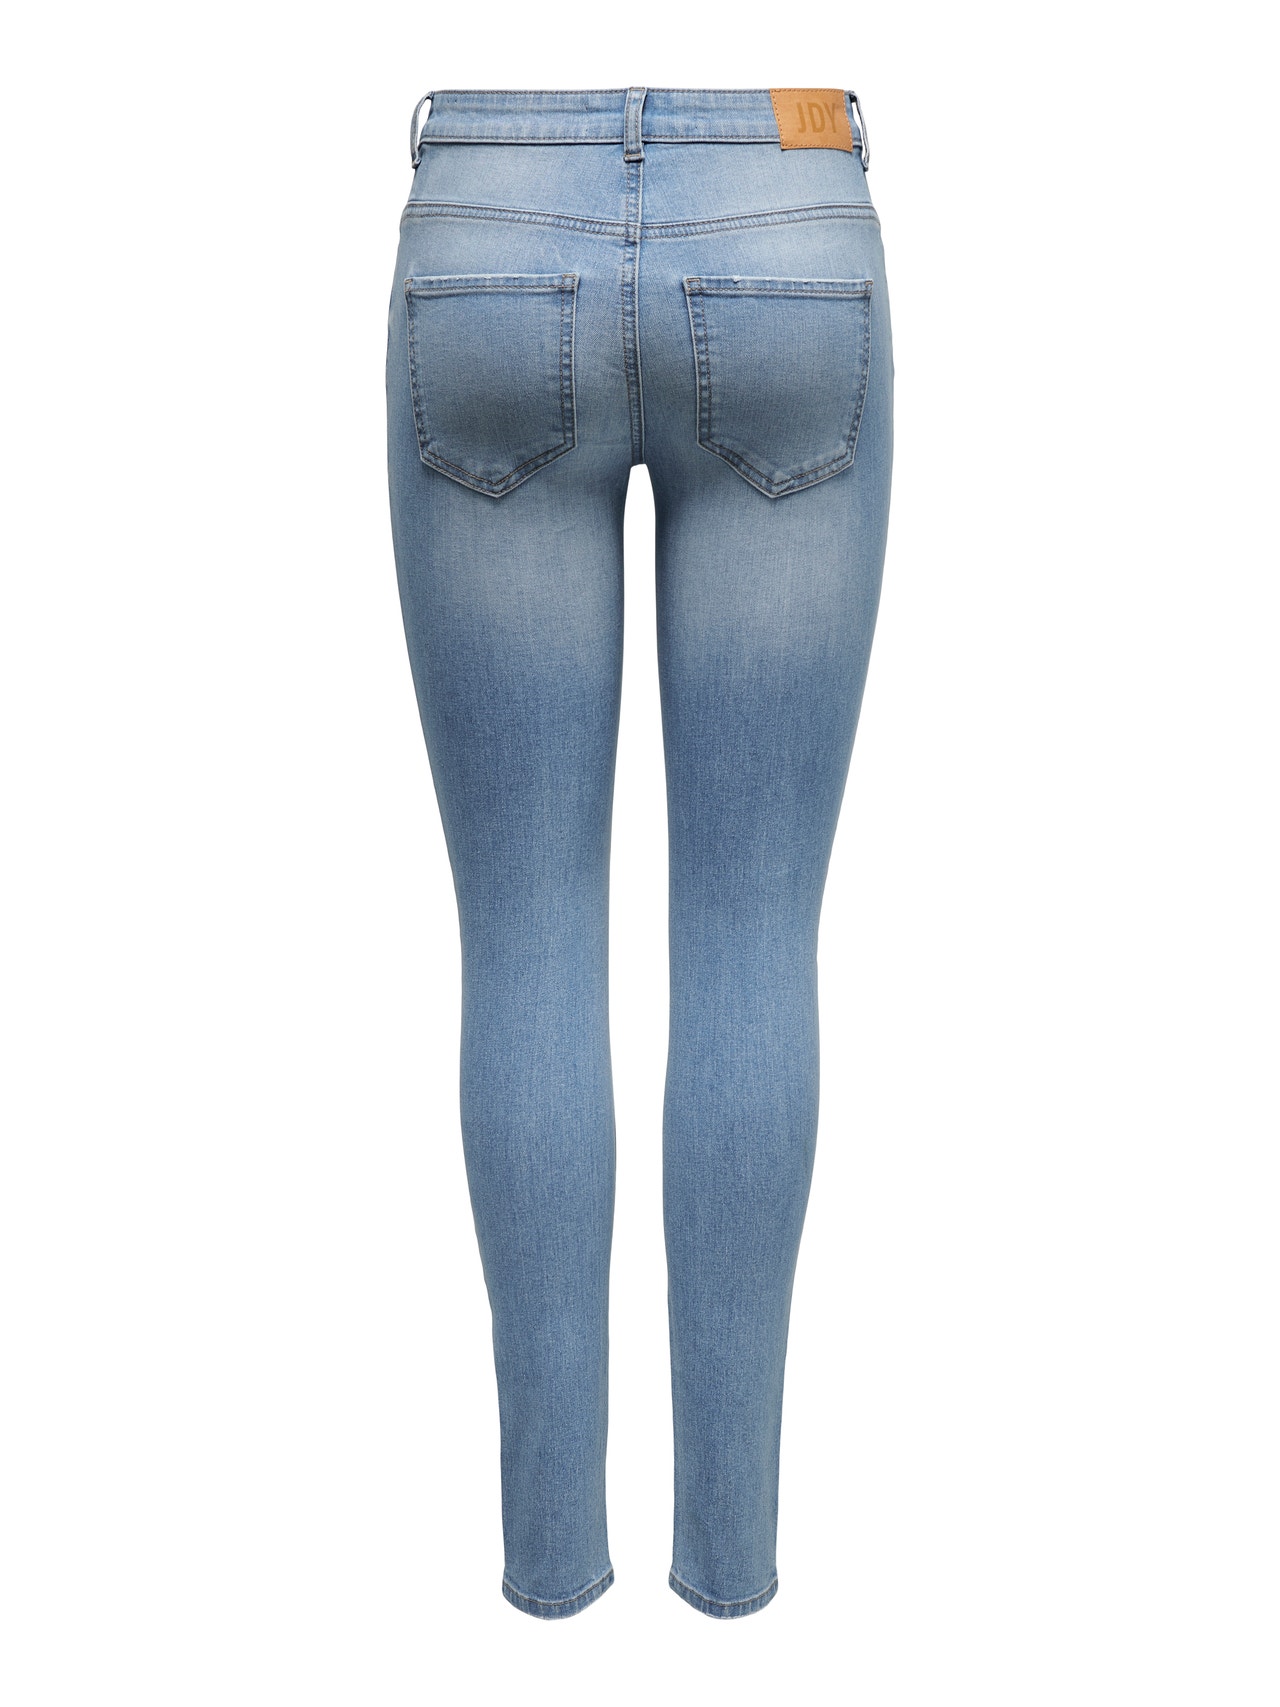 ONLY Jeans Skinny Fit Taille moyenne -Light Blue Denim - 15274412